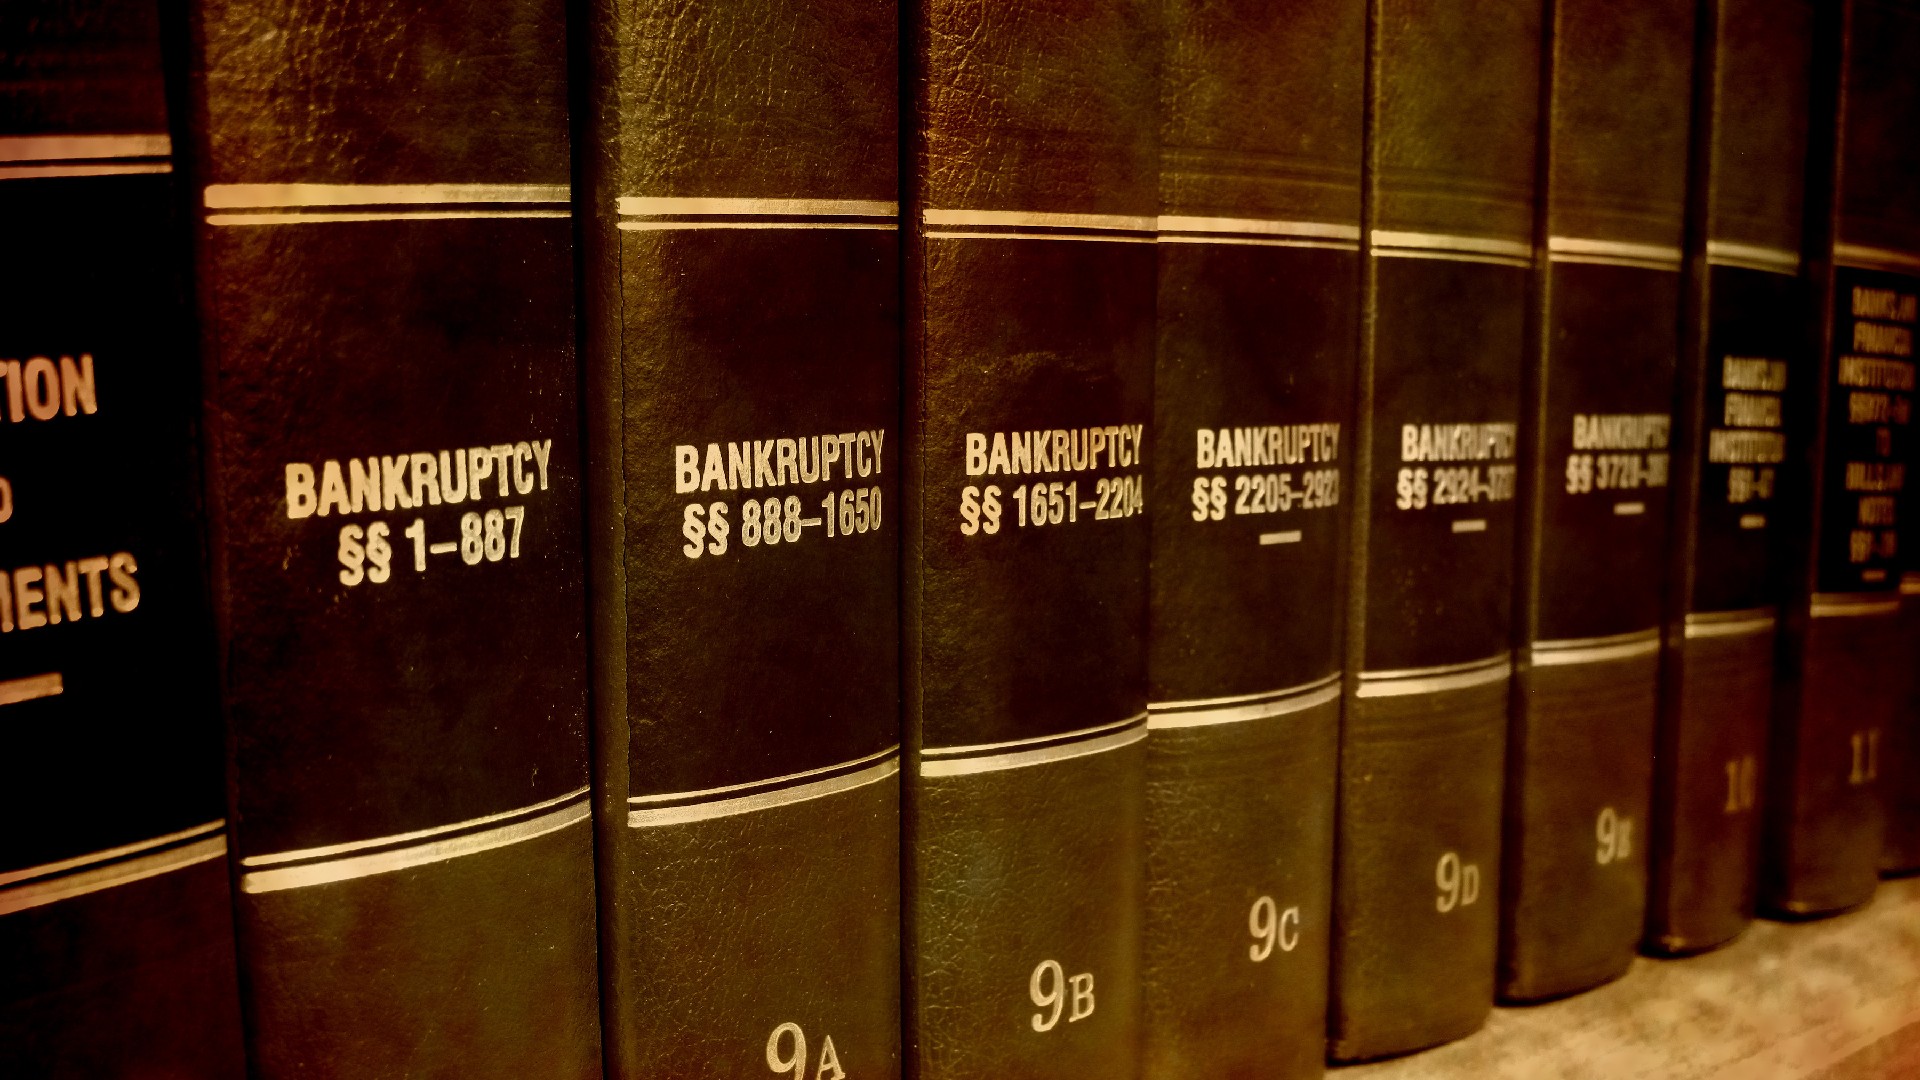 A row of bankruptcy law books